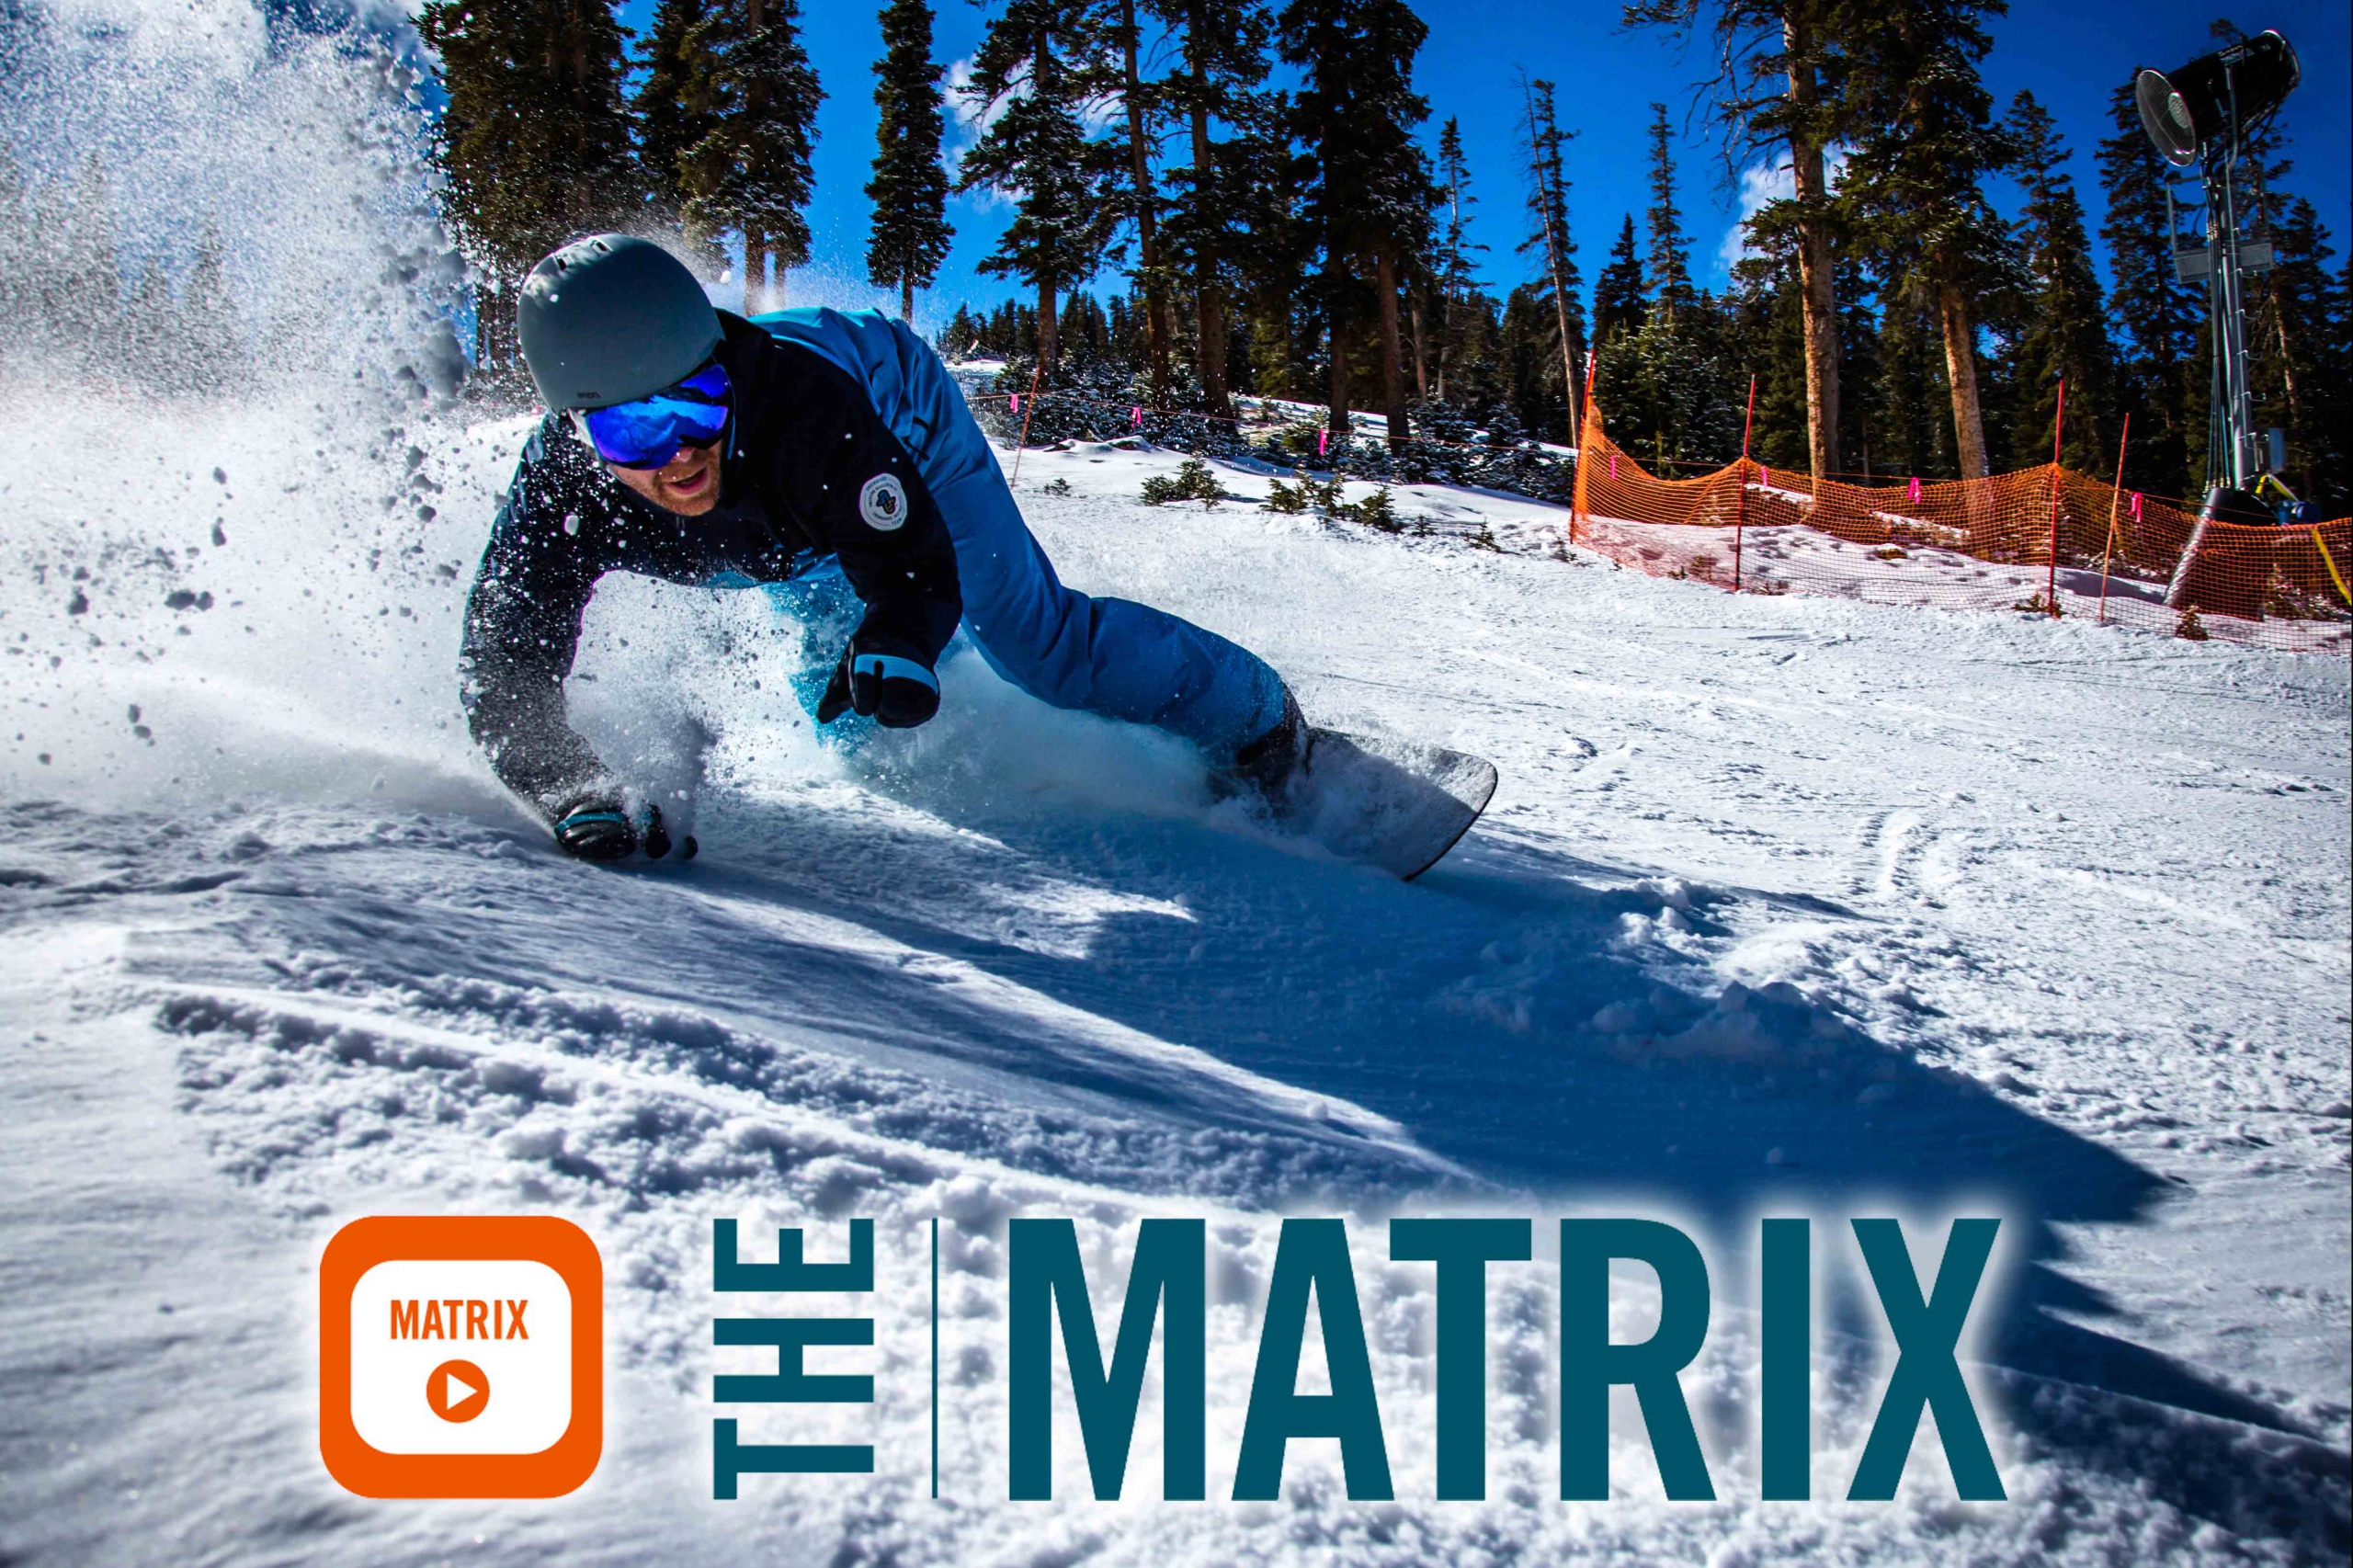 A snowboarder carves across the snow and image reads the matrix